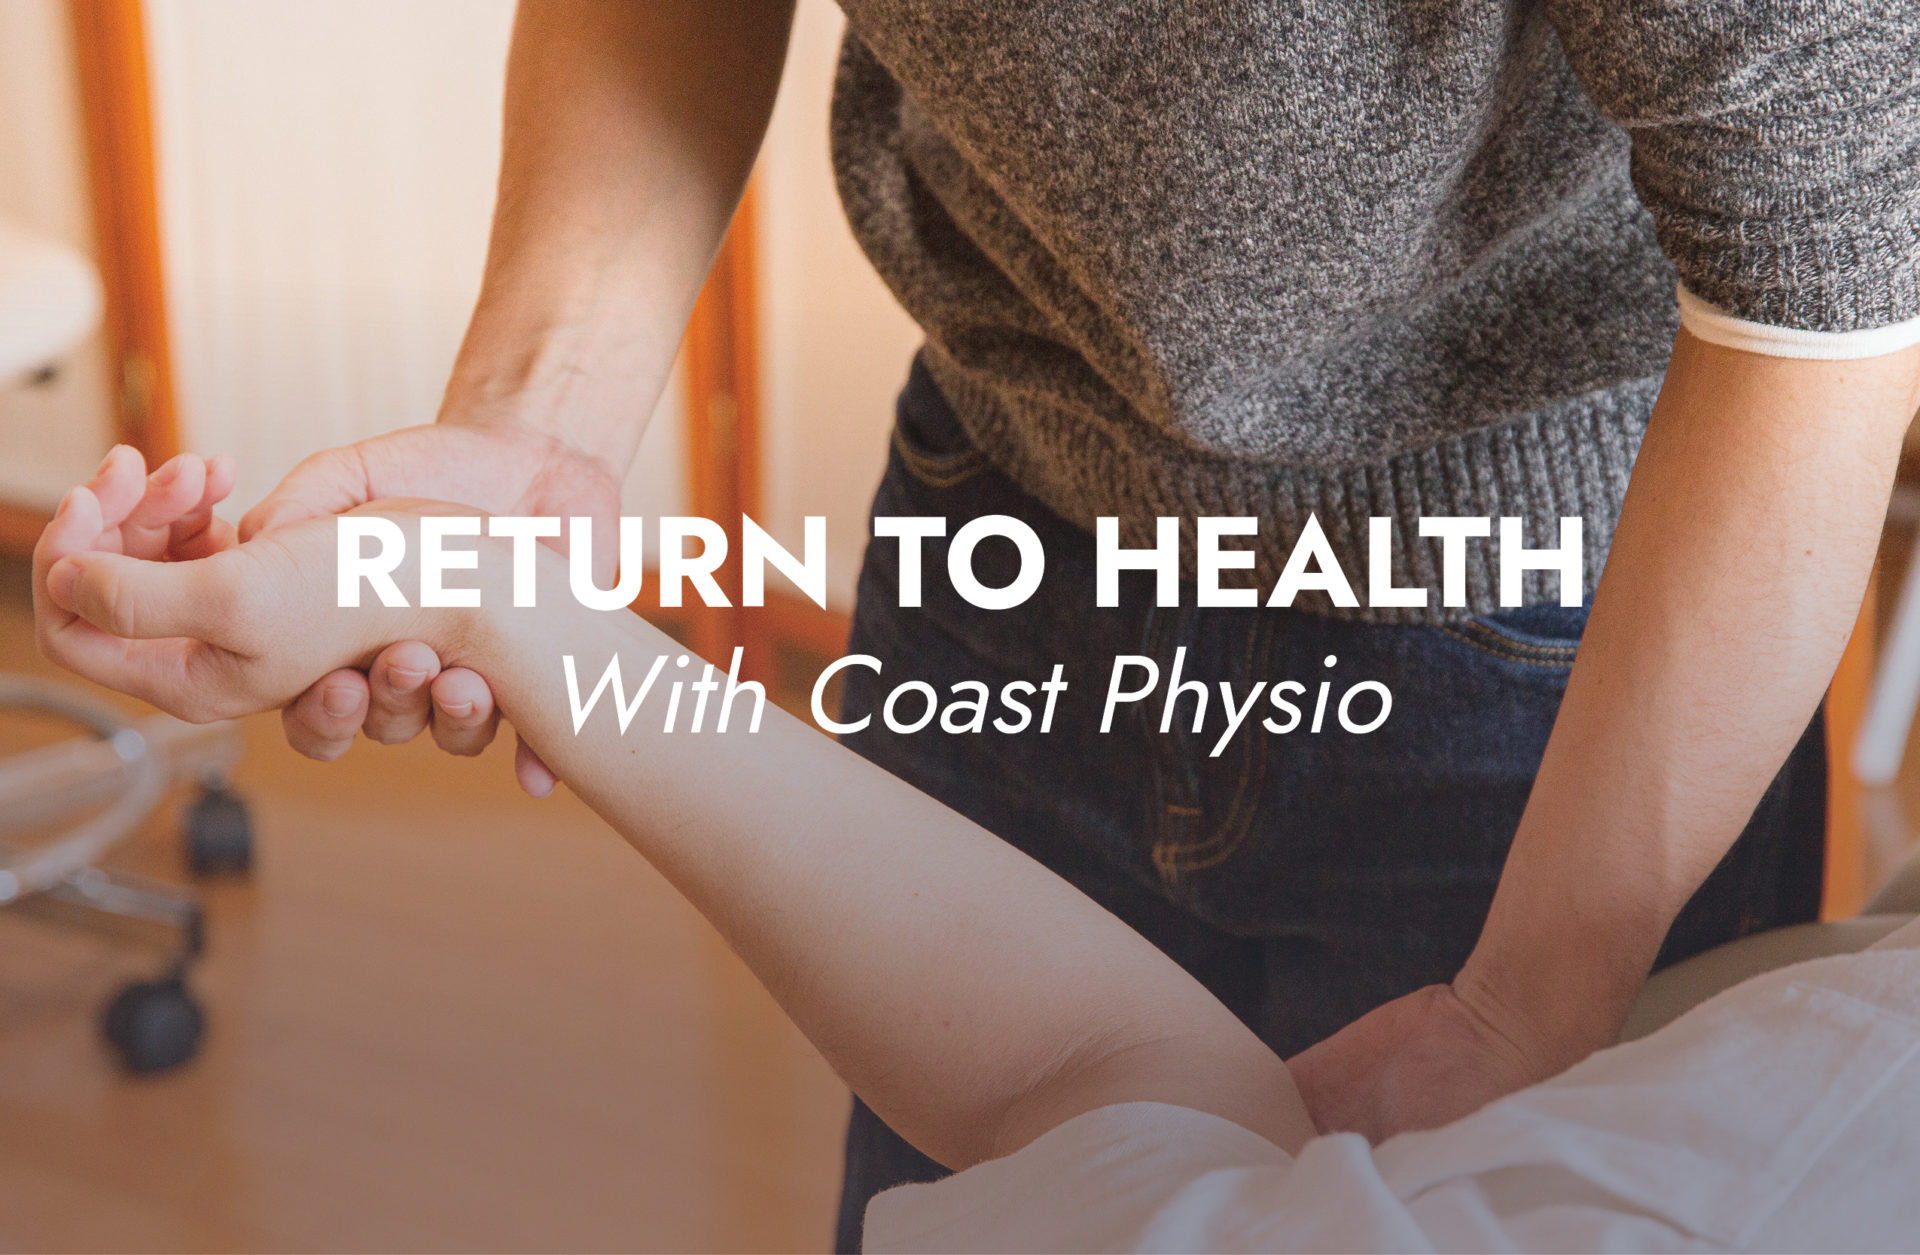 Coast Physiotherapy Branding and Tagline Featured Image